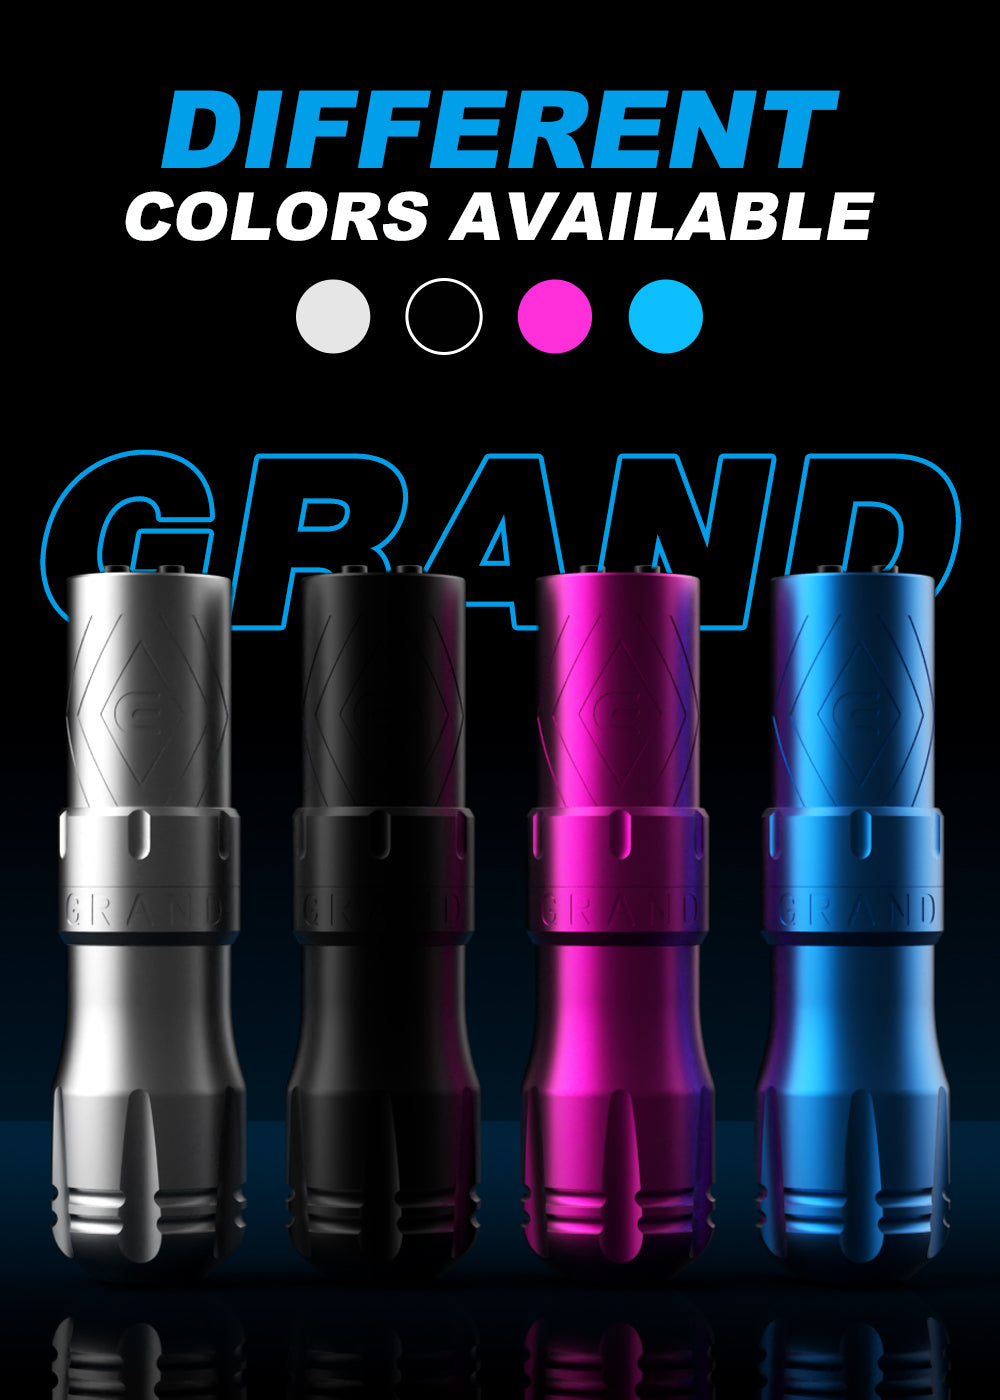 EMALLA GRAND Wireless Tattoo Pen Machine with different colors available